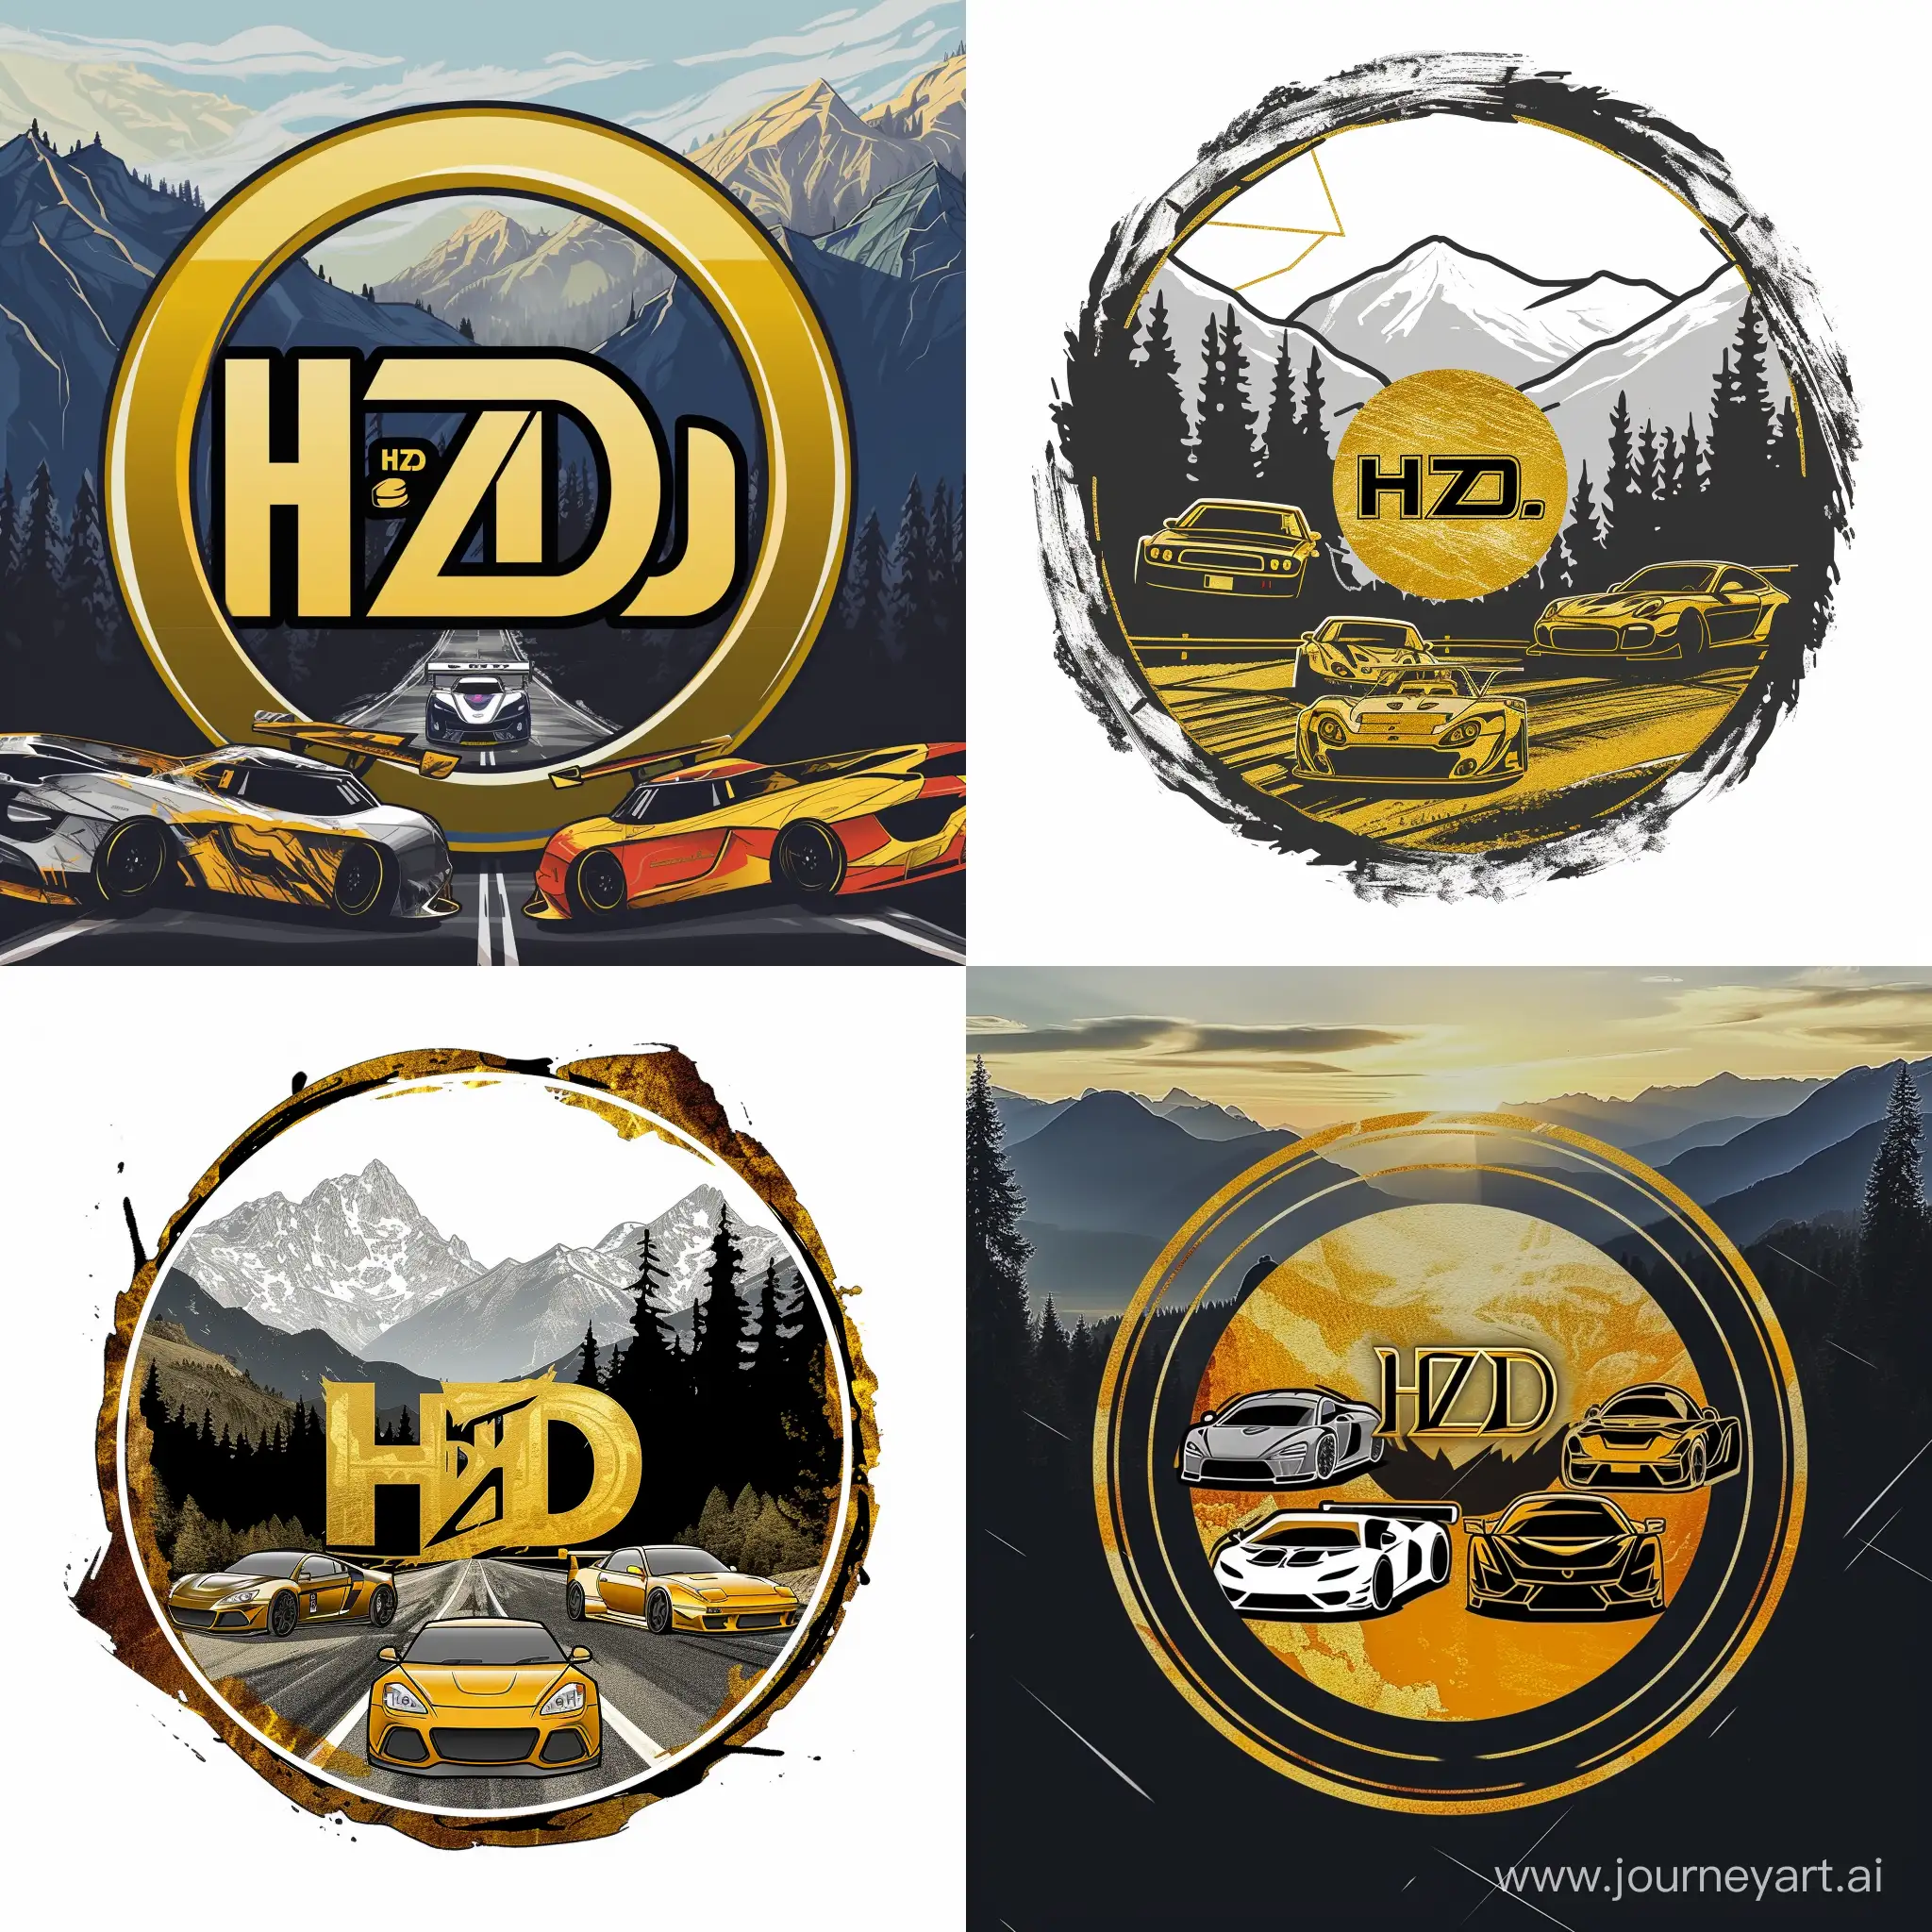 Dynamic-Gold-Racing-Cars-in-Mountainous-Landscape-HZD-Circle-Logo